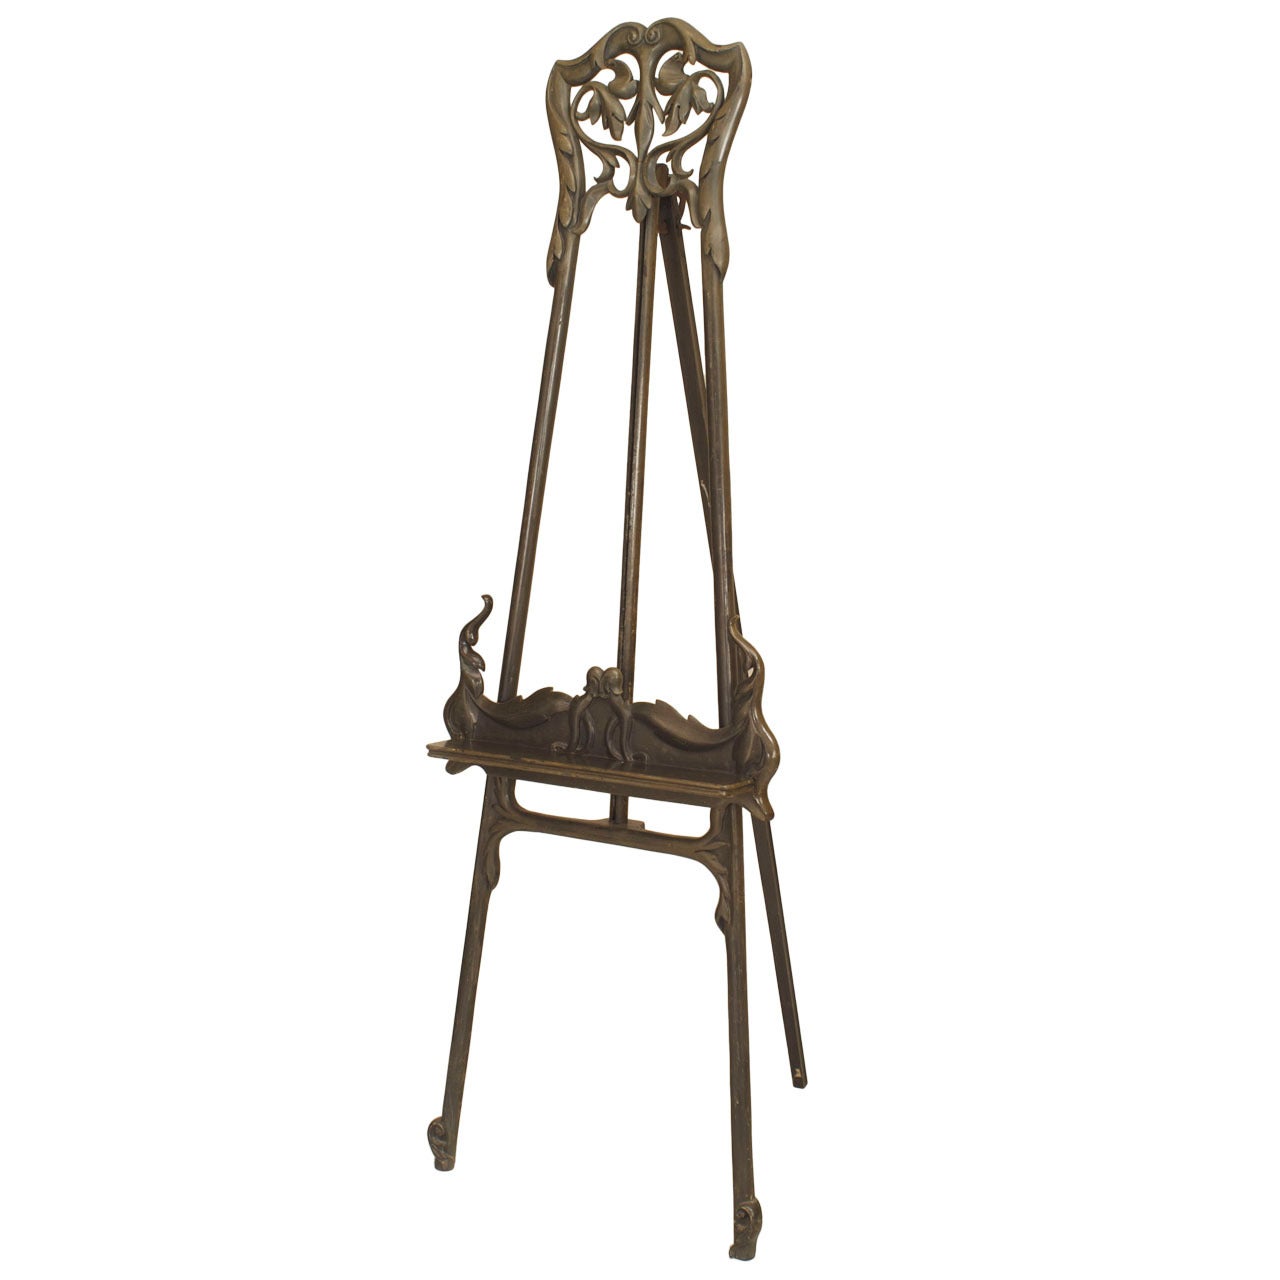 Turn of the Century Art Nouveau Filigreed Easel or Stand